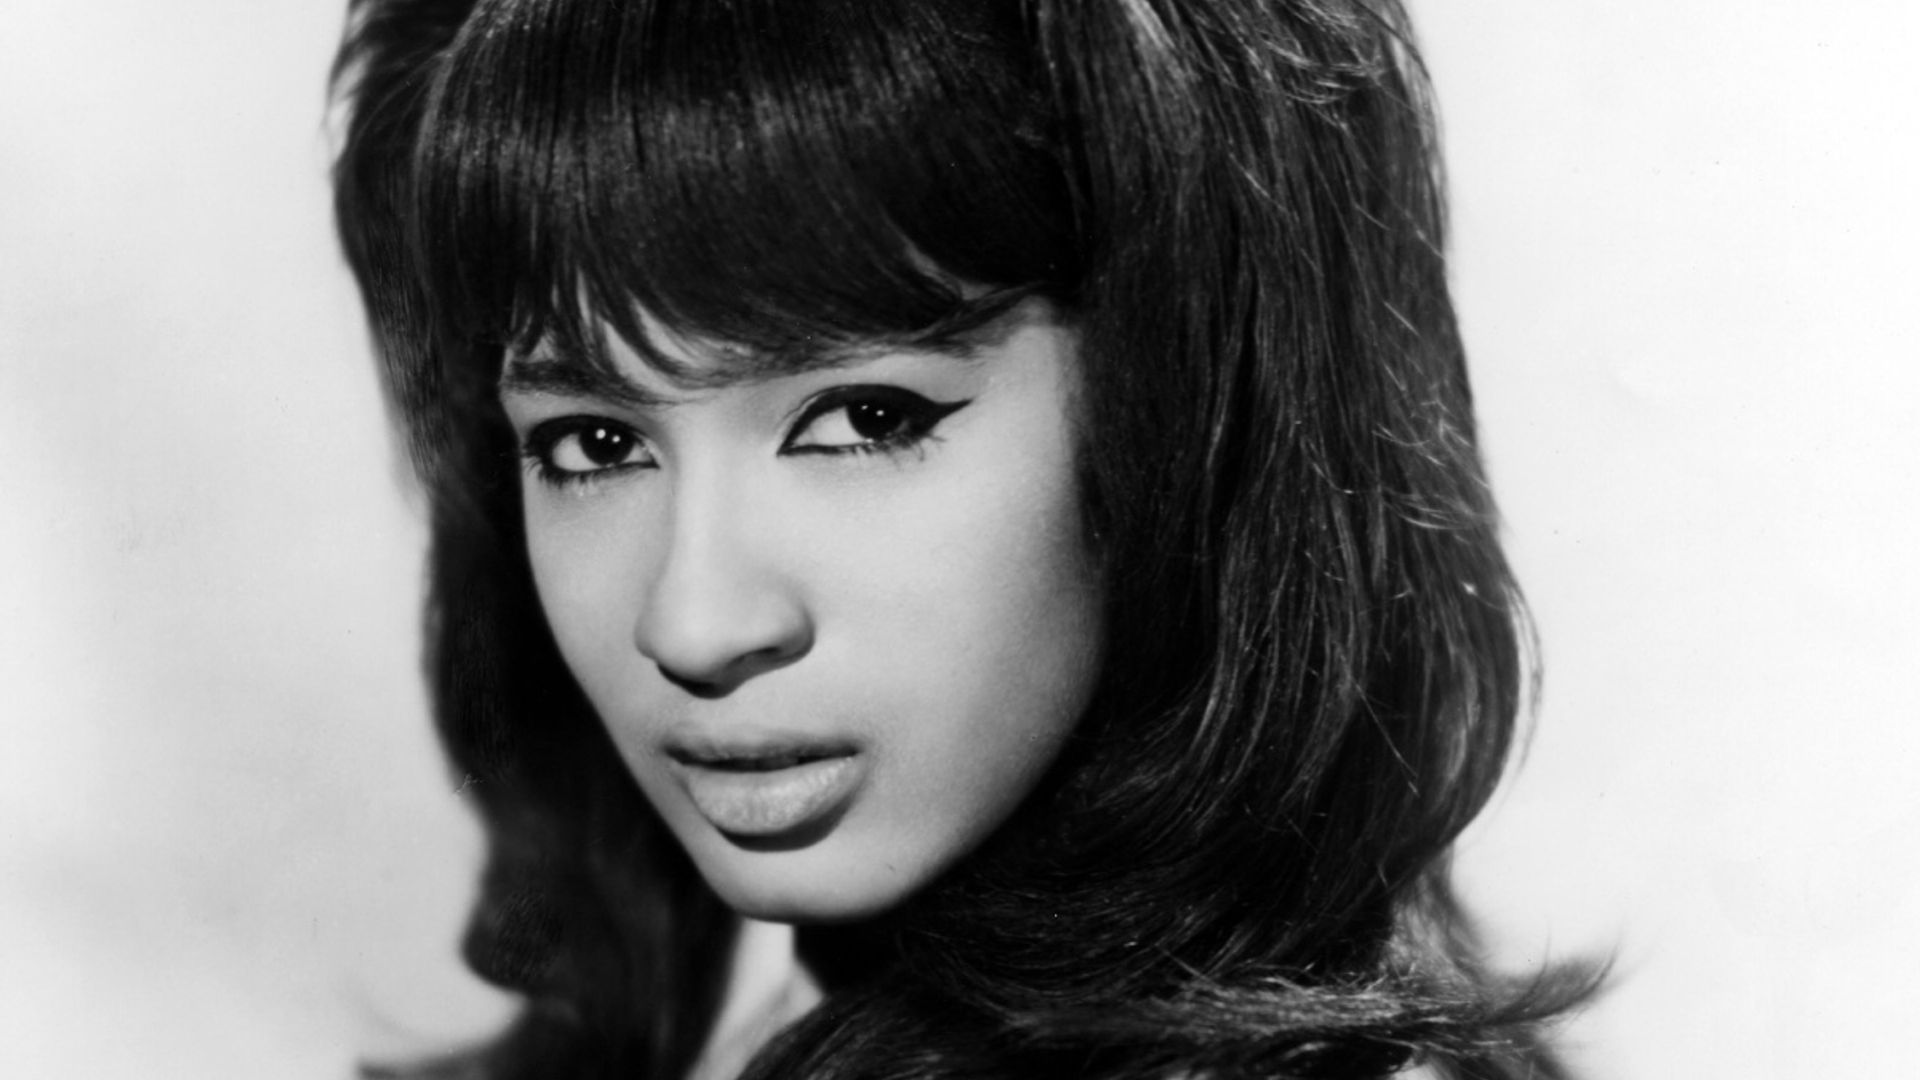 Ronnie Spector, lead singer of the legendary girl group the Ronettes, dies age 78